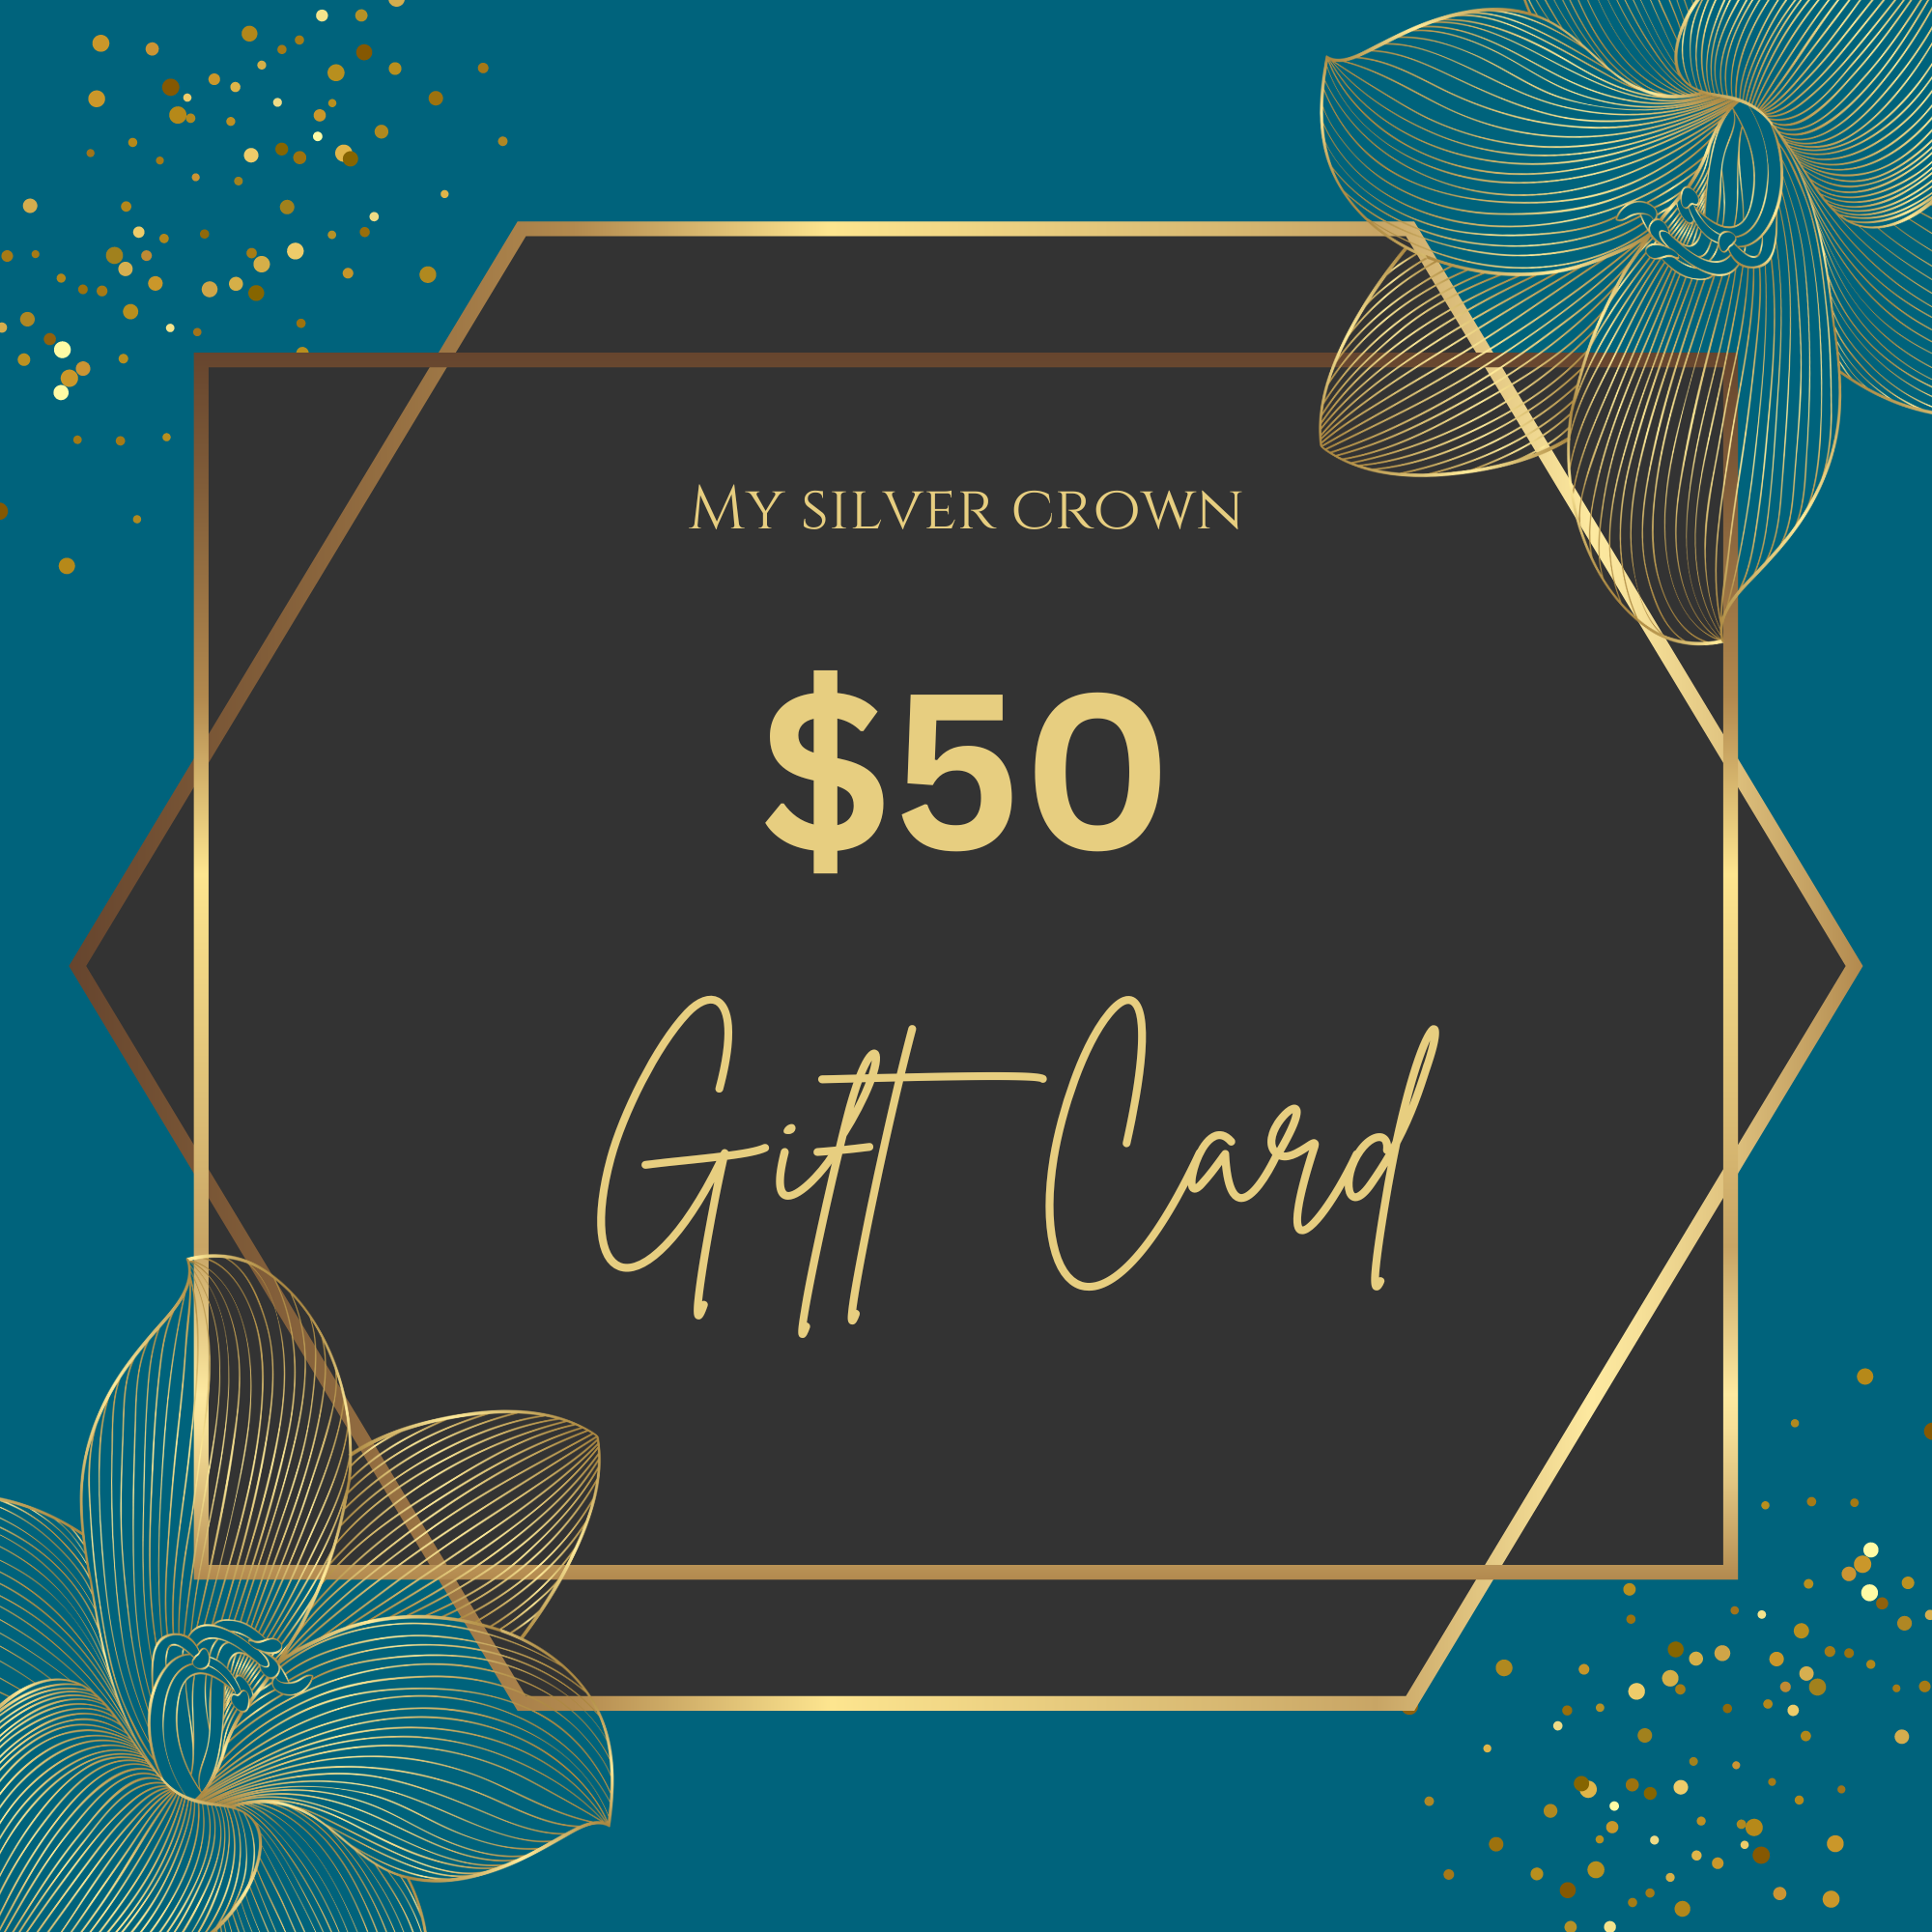 My Silver Crown Gift Cards